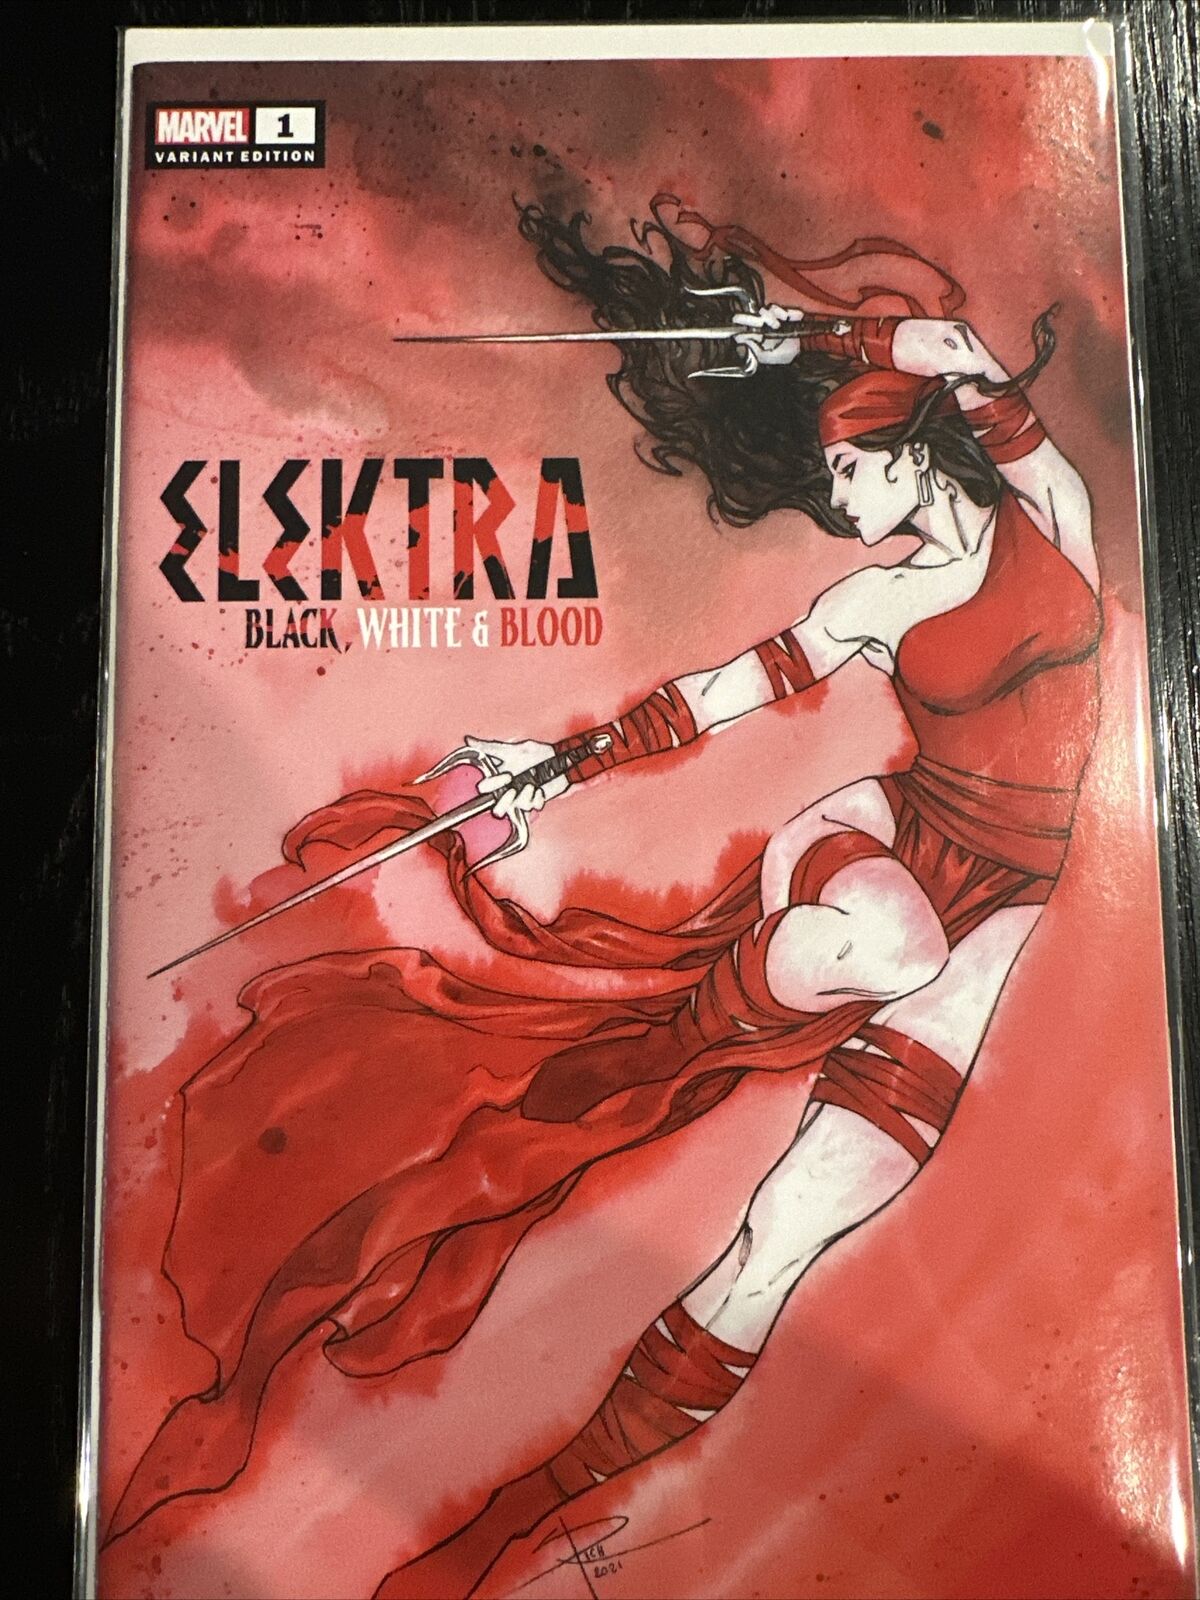 Elektra: Black, White, and Blood #1 (Marvel, March 2022)